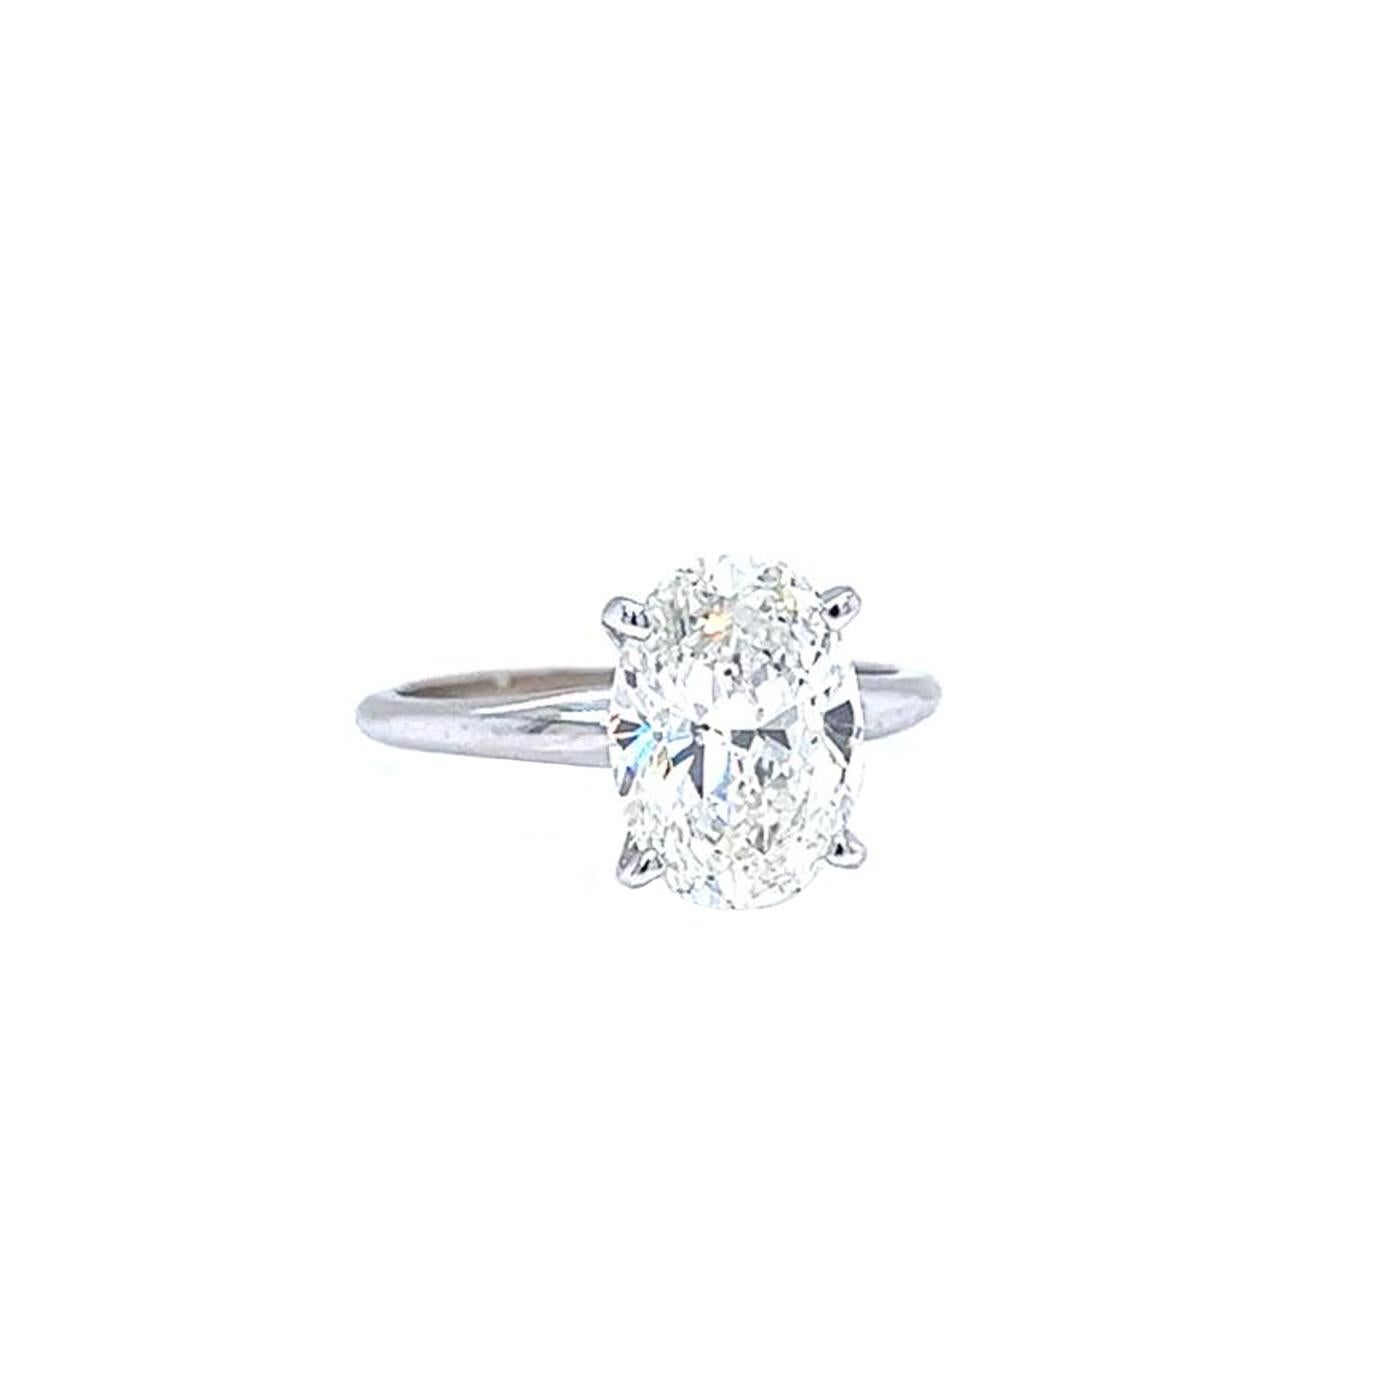 GIA Certified 3.02 Carat Oval Cut Diamond Tiffany Style 14K White Gold Ring In Good Condition For Sale In Aventura, FL